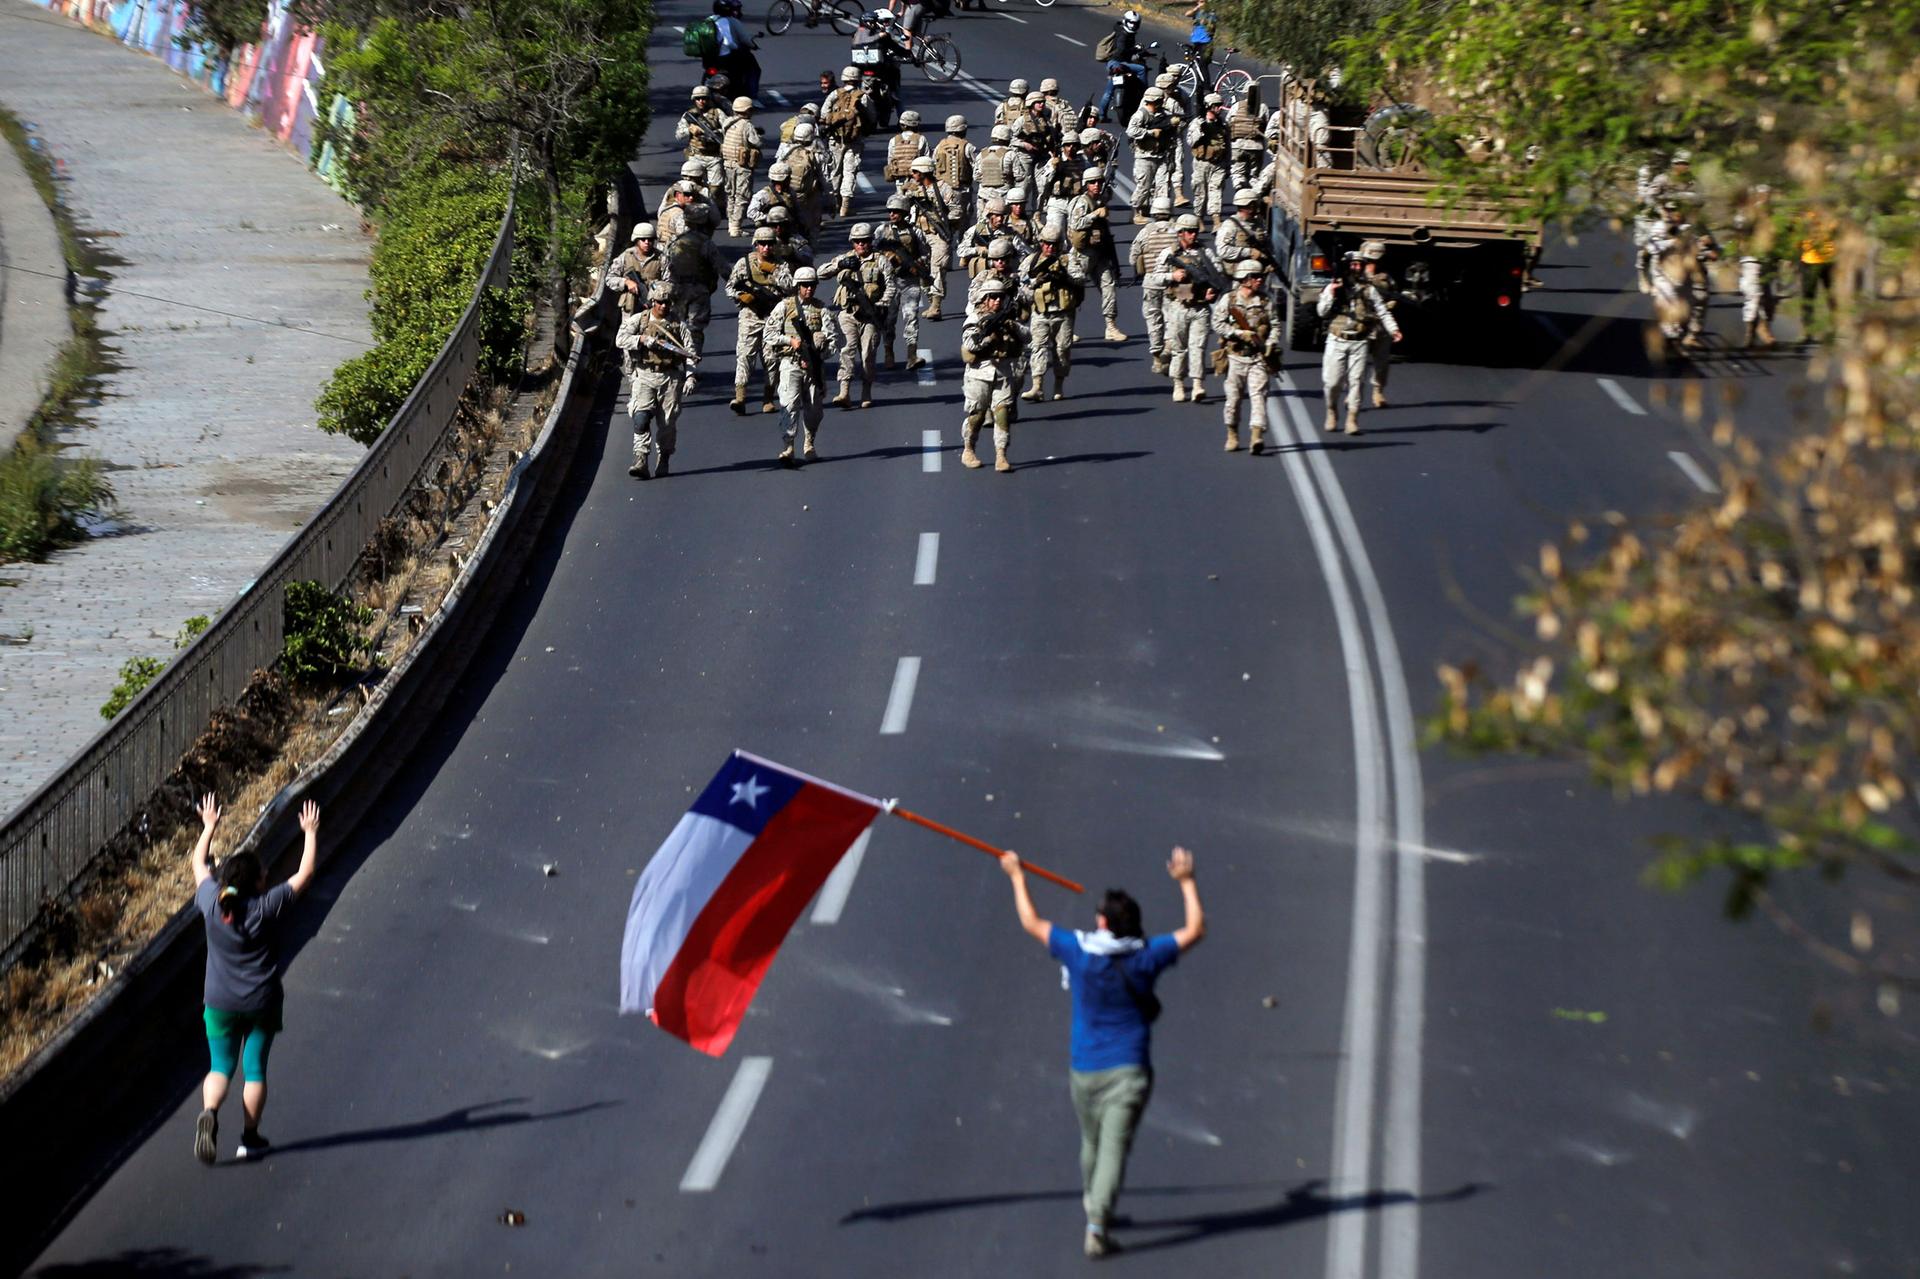 Dozens of Chilean soldiers are shown marching down a road toward two protesters, one carrying a Chilean national flag.